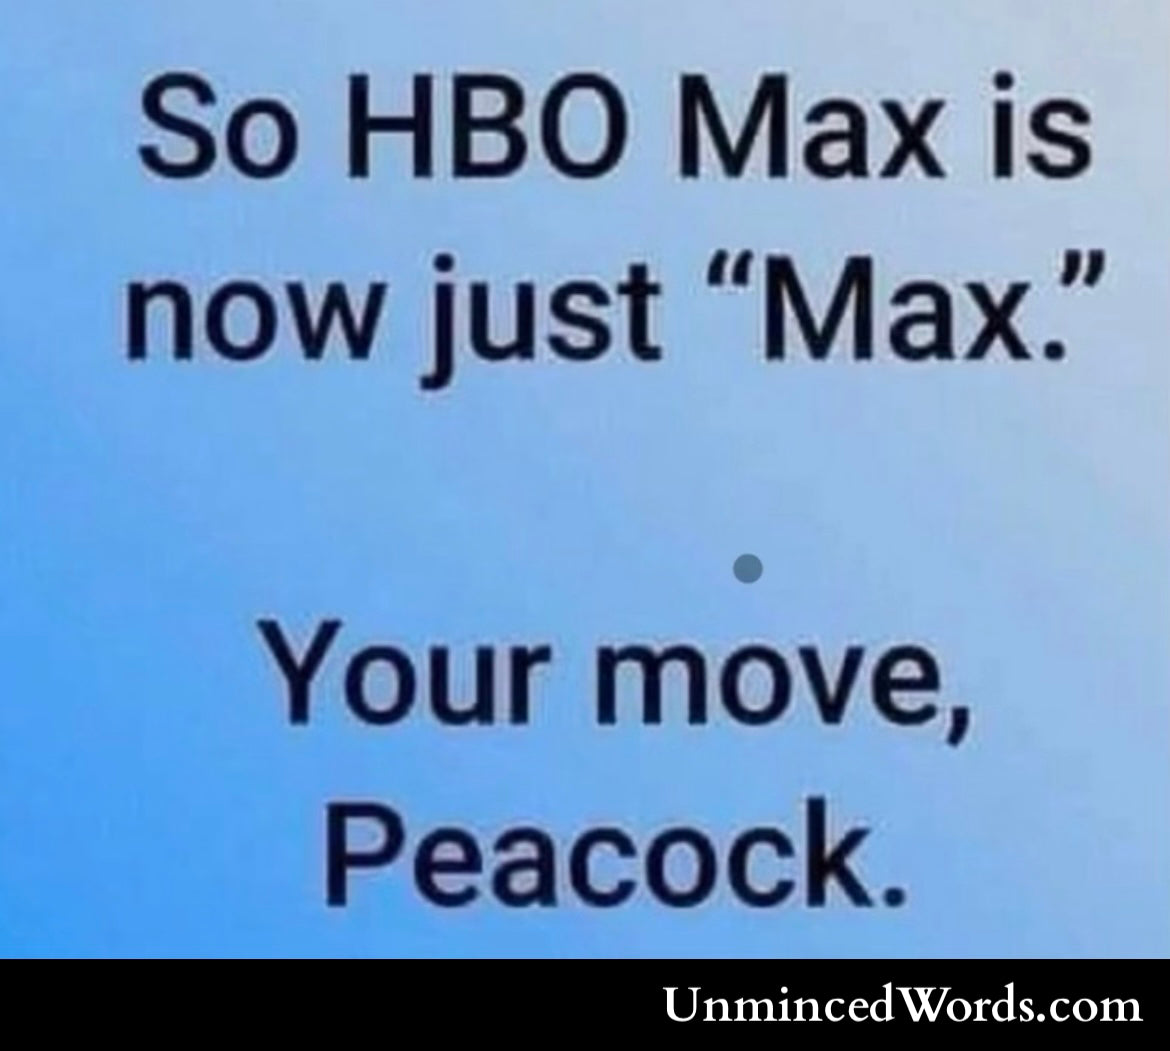 So now HBOMax is just MAX… Your move “Peacock”